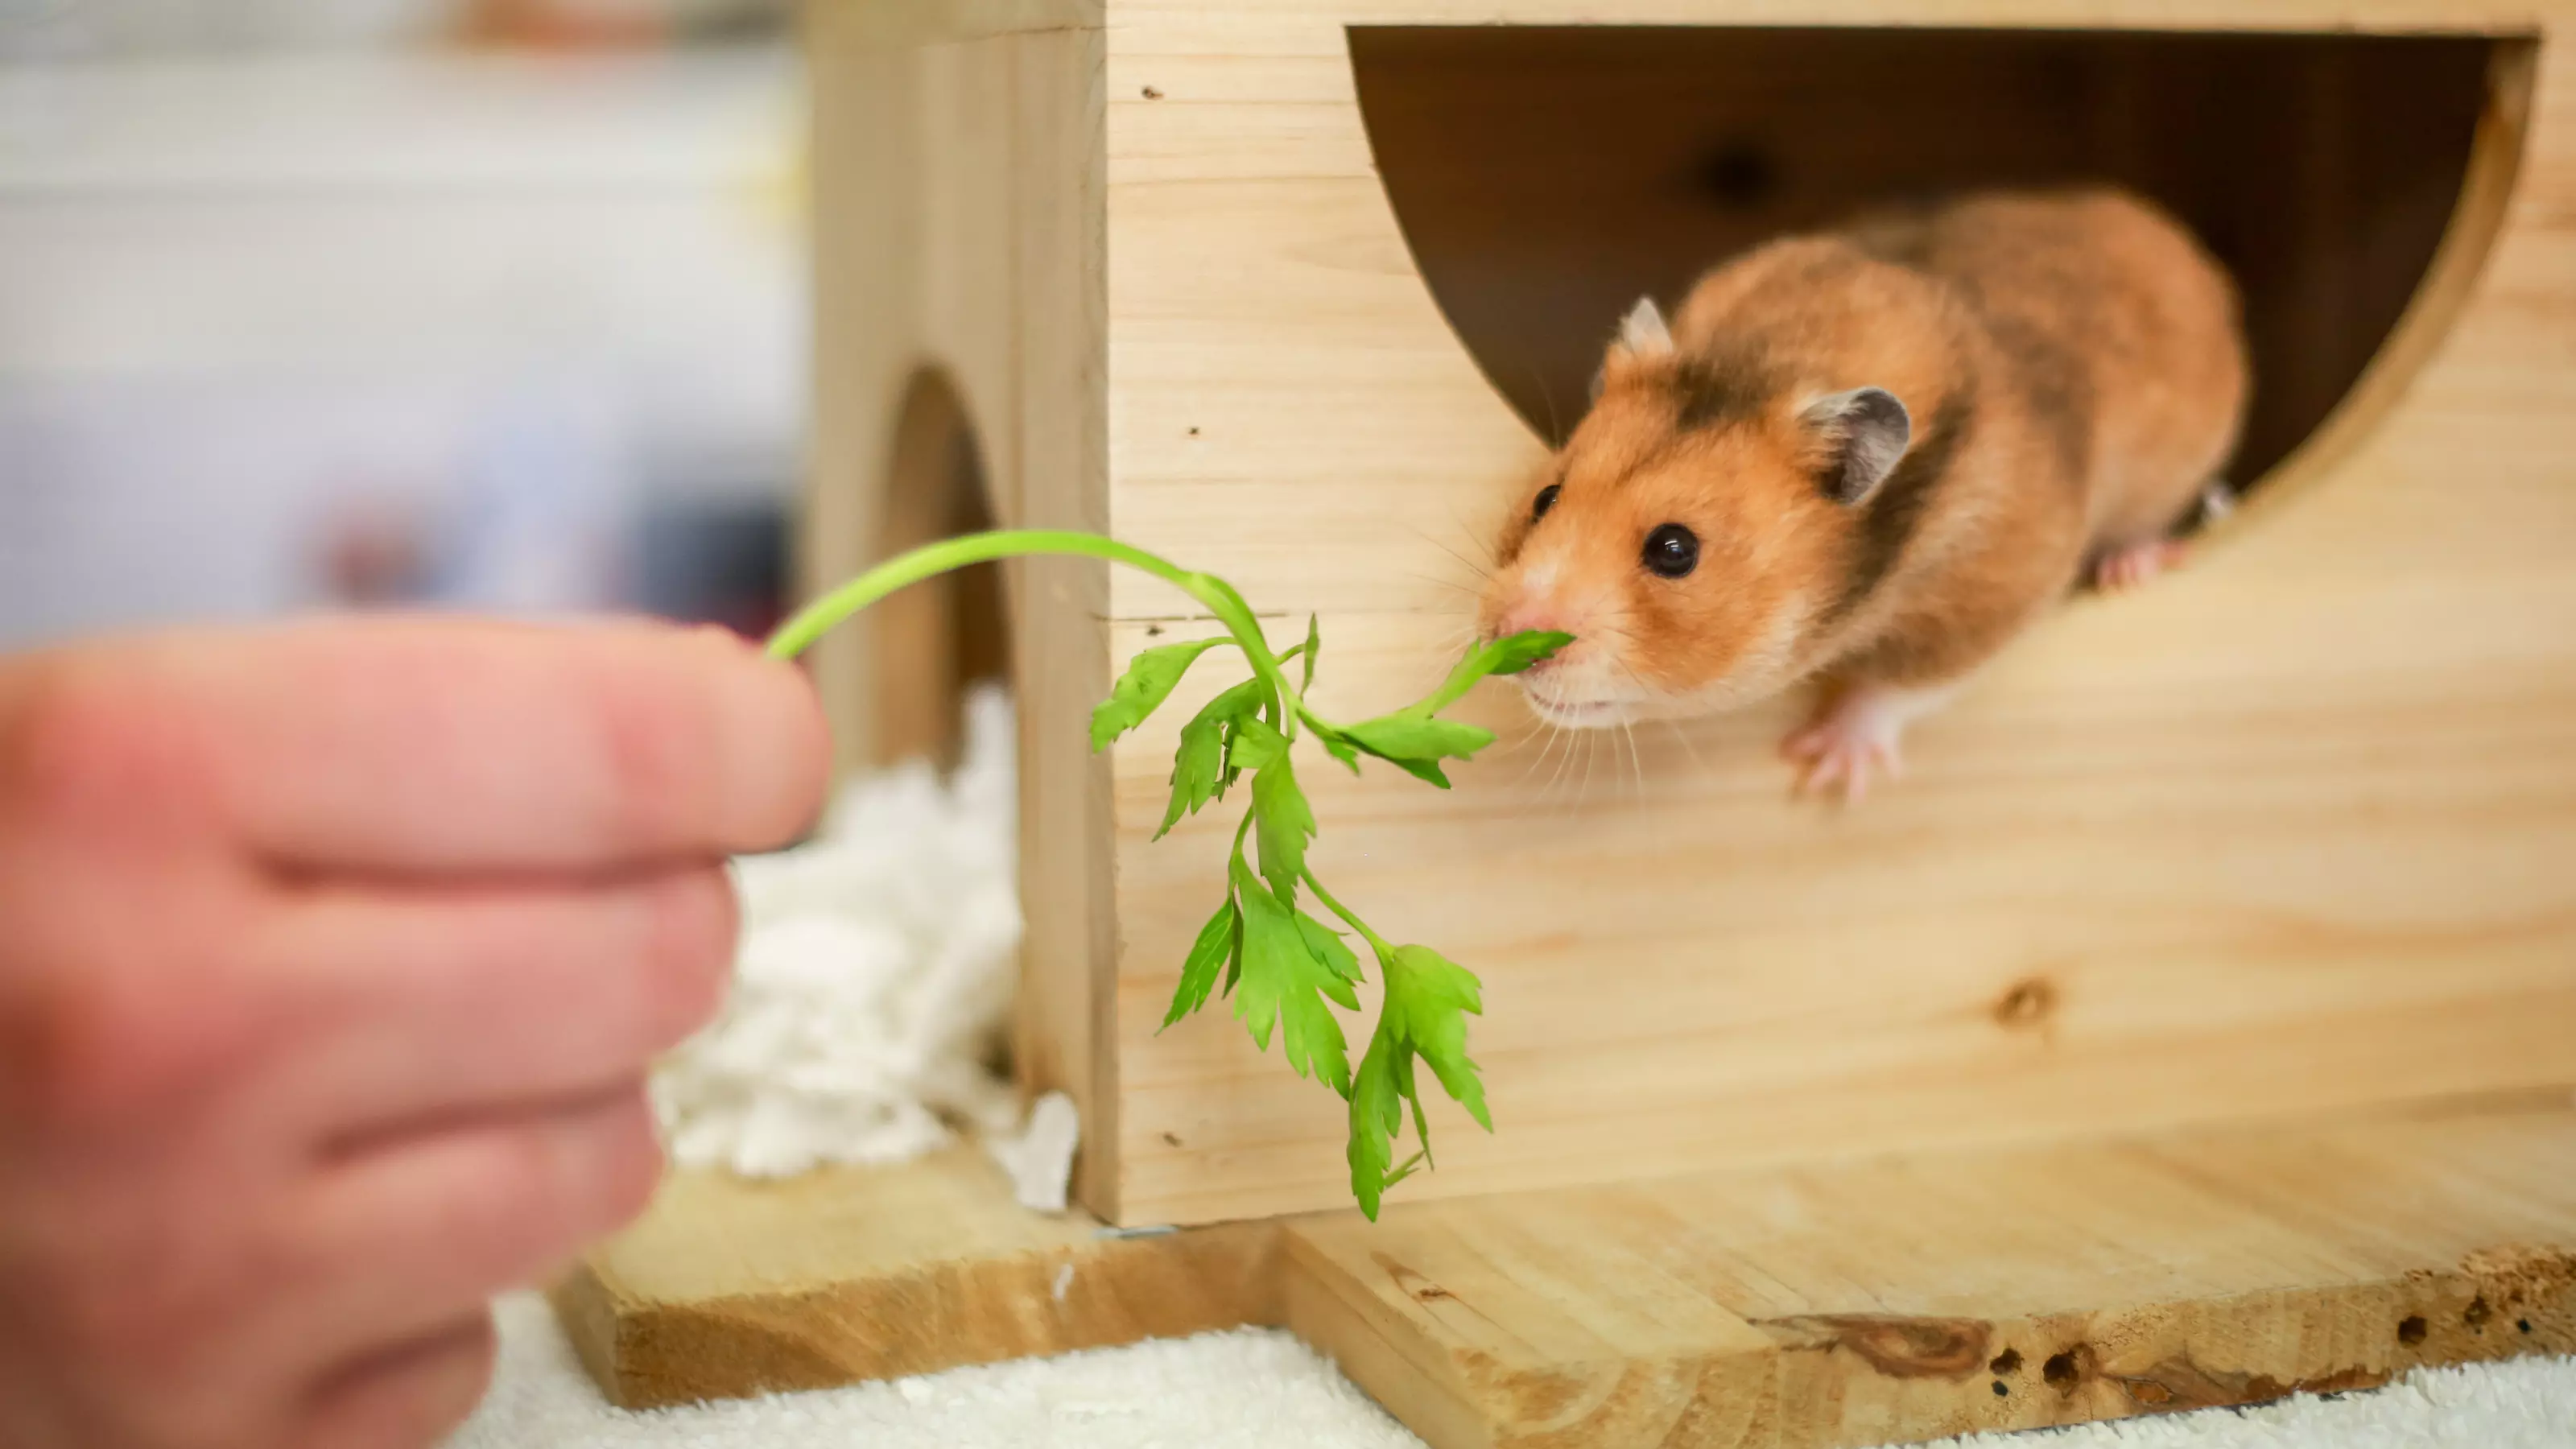 A brown hamster leans out of their wooden hut for some leafy greens.